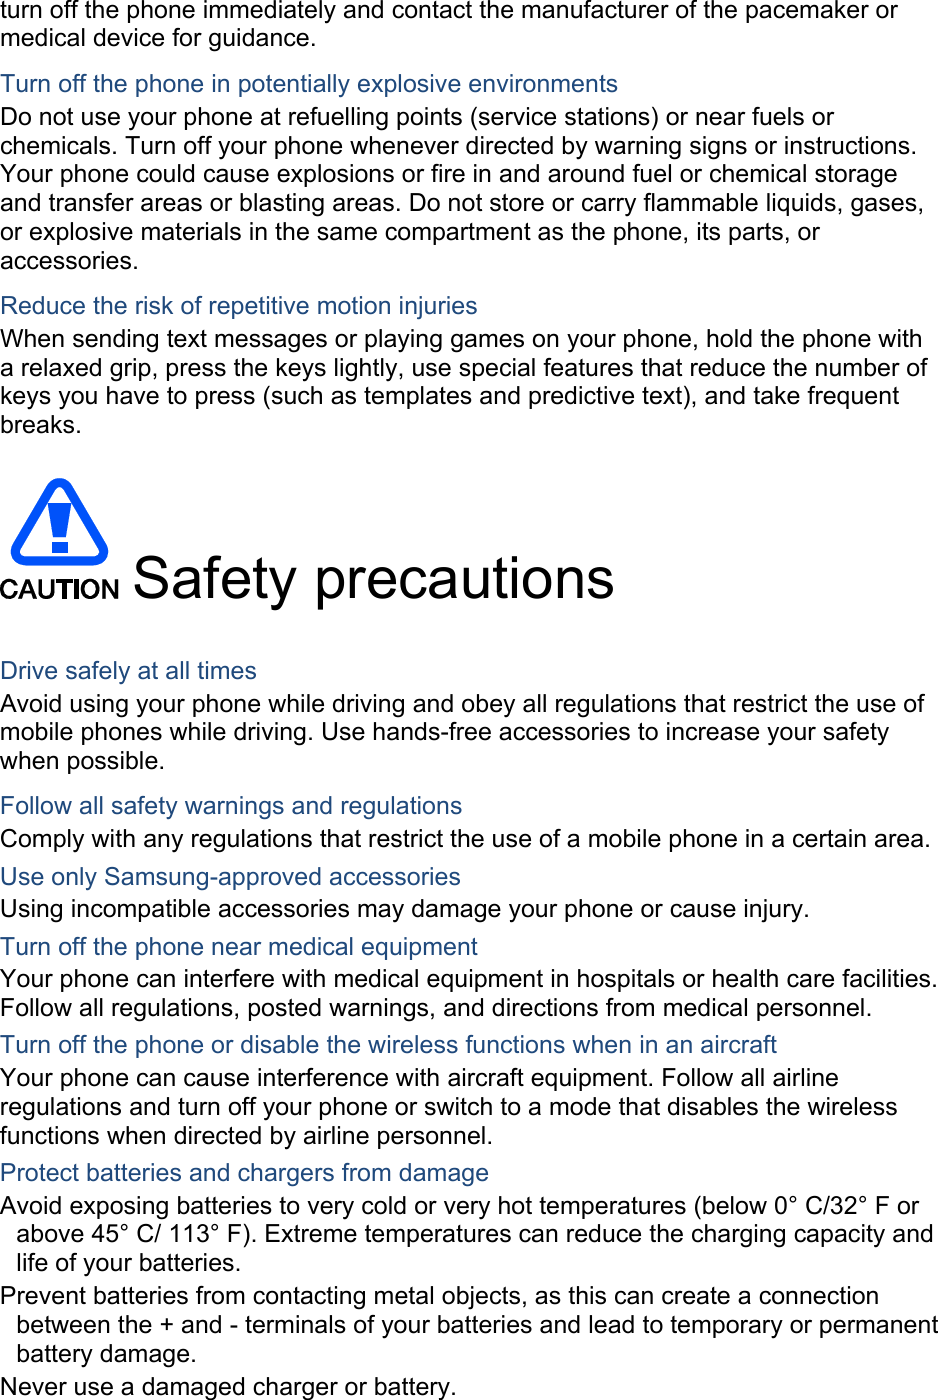 turn off the phone immediately and contact the manufacturer of the pacemaker or medical device for guidance. Turn off the phone in potentially explosive environments Do not use your phone at refuelling points (service stations) or near fuels or chemicals. Turn off your phone whenever directed by warning signs or instructions. Your phone could cause explosions or fire in and around fuel or chemical storage and transfer areas or blasting areas. Do not store or carry flammable liquids, gases, or explosive materials in the same compartment as the phone, its parts, or accessories. Reduce the risk of repetitive motion injuries When sending text messages or playing games on your phone, hold the phone with a relaxed grip, press the keys lightly, use special features that reduce the number of keys you have to press (such as templates and predictive text), and take frequent breaks.   Safety precautions  Drive safely at all times Avoid using your phone while driving and obey all regulations that restrict the use of mobile phones while driving. Use hands-free accessories to increase your safety when possible. Follow all safety warnings and regulations Comply with any regulations that restrict the use of a mobile phone in a certain area. Use only Samsung-approved accessories Using incompatible accessories may damage your phone or cause injury. Turn off the phone near medical equipment Your phone can interfere with medical equipment in hospitals or health care facilities. Follow all regulations, posted warnings, and directions from medical personnel. Turn off the phone or disable the wireless functions when in an aircraft Your phone can cause interference with aircraft equipment. Follow all airline regulations and turn off your phone or switch to a mode that disables the wireless functions when directed by airline personnel. Protect batteries and chargers from damage Avoid exposing batteries to very cold or very hot temperatures (below 0° C/32° F or above 45° C/ 113° F). Extreme temperatures can reduce the charging capacity and life of your batteries. Prevent batteries from contacting metal objects, as this can create a connection between the + and - terminals of your batteries and lead to temporary or permanent battery damage. Never use a damaged charger or battery. 